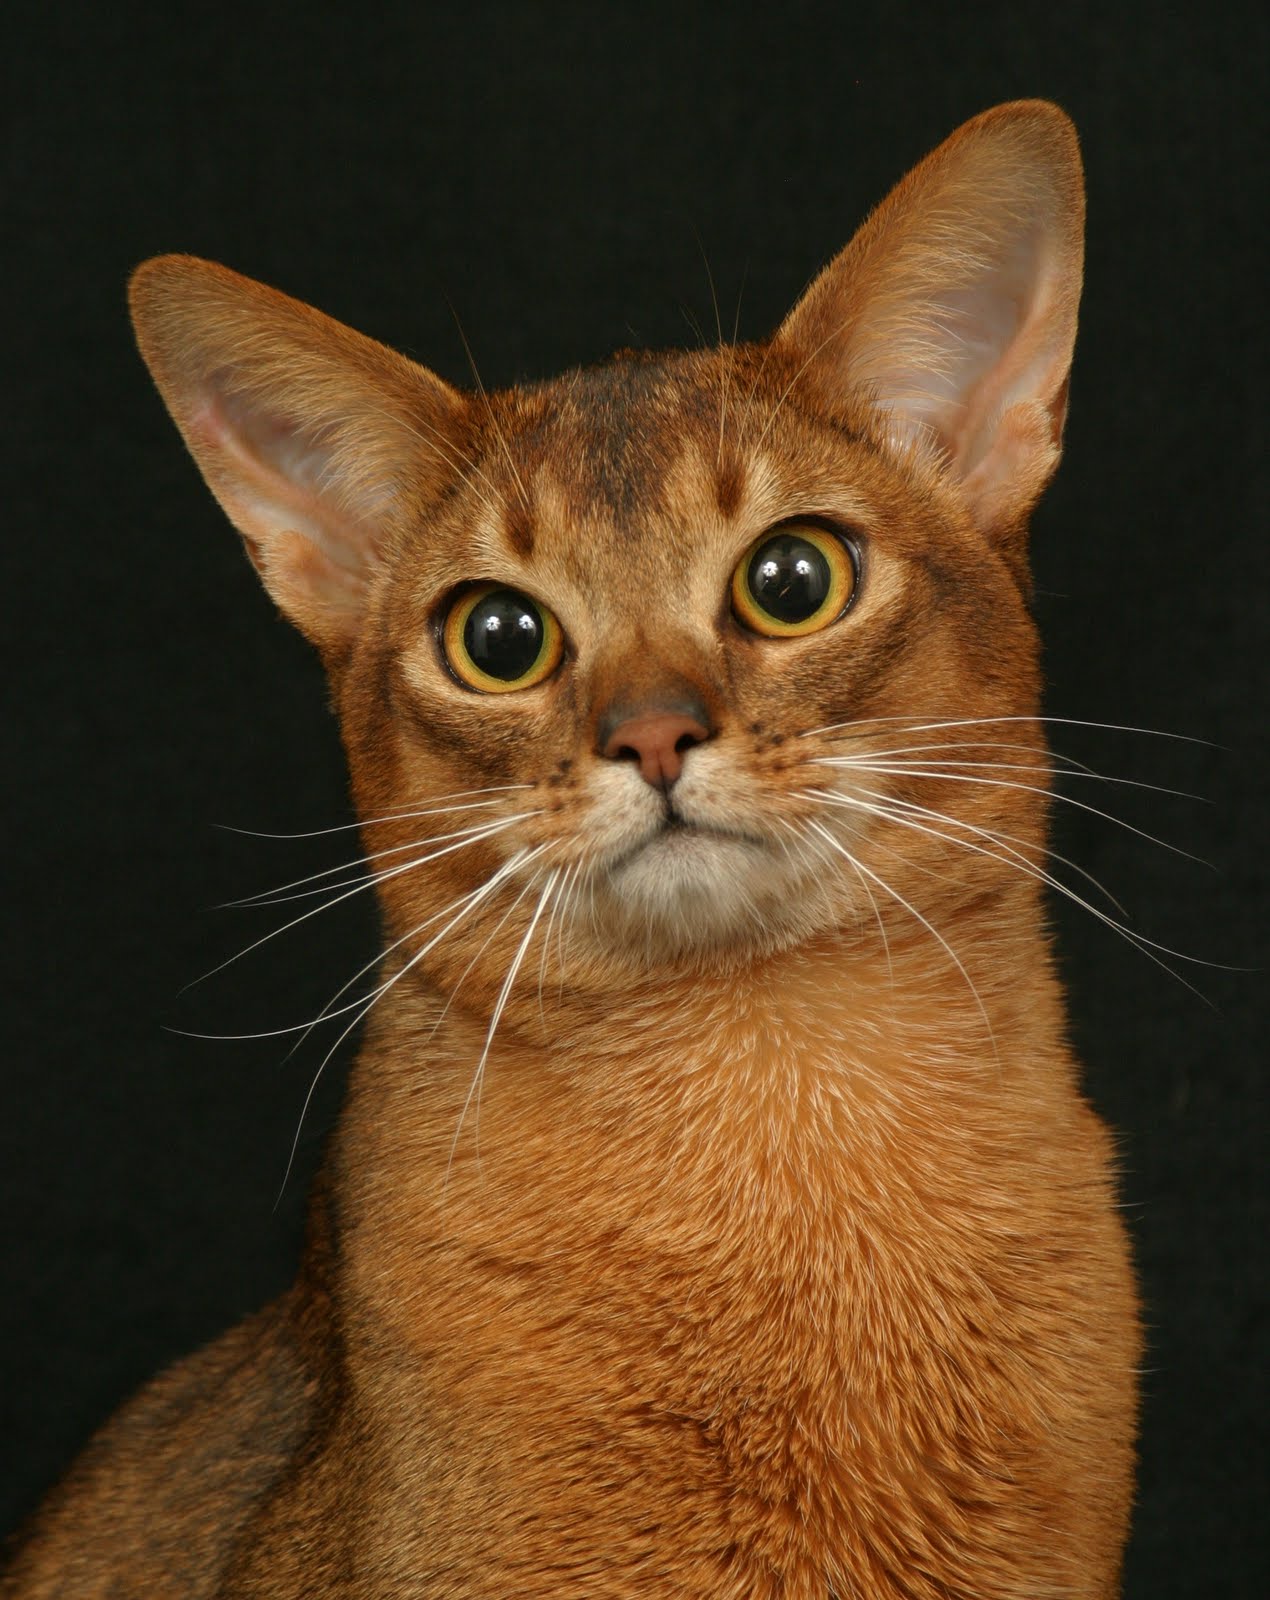 Download Encyclopedia of Cats Breed: Ruddy Abyssinian Cat | Tawny or Usual